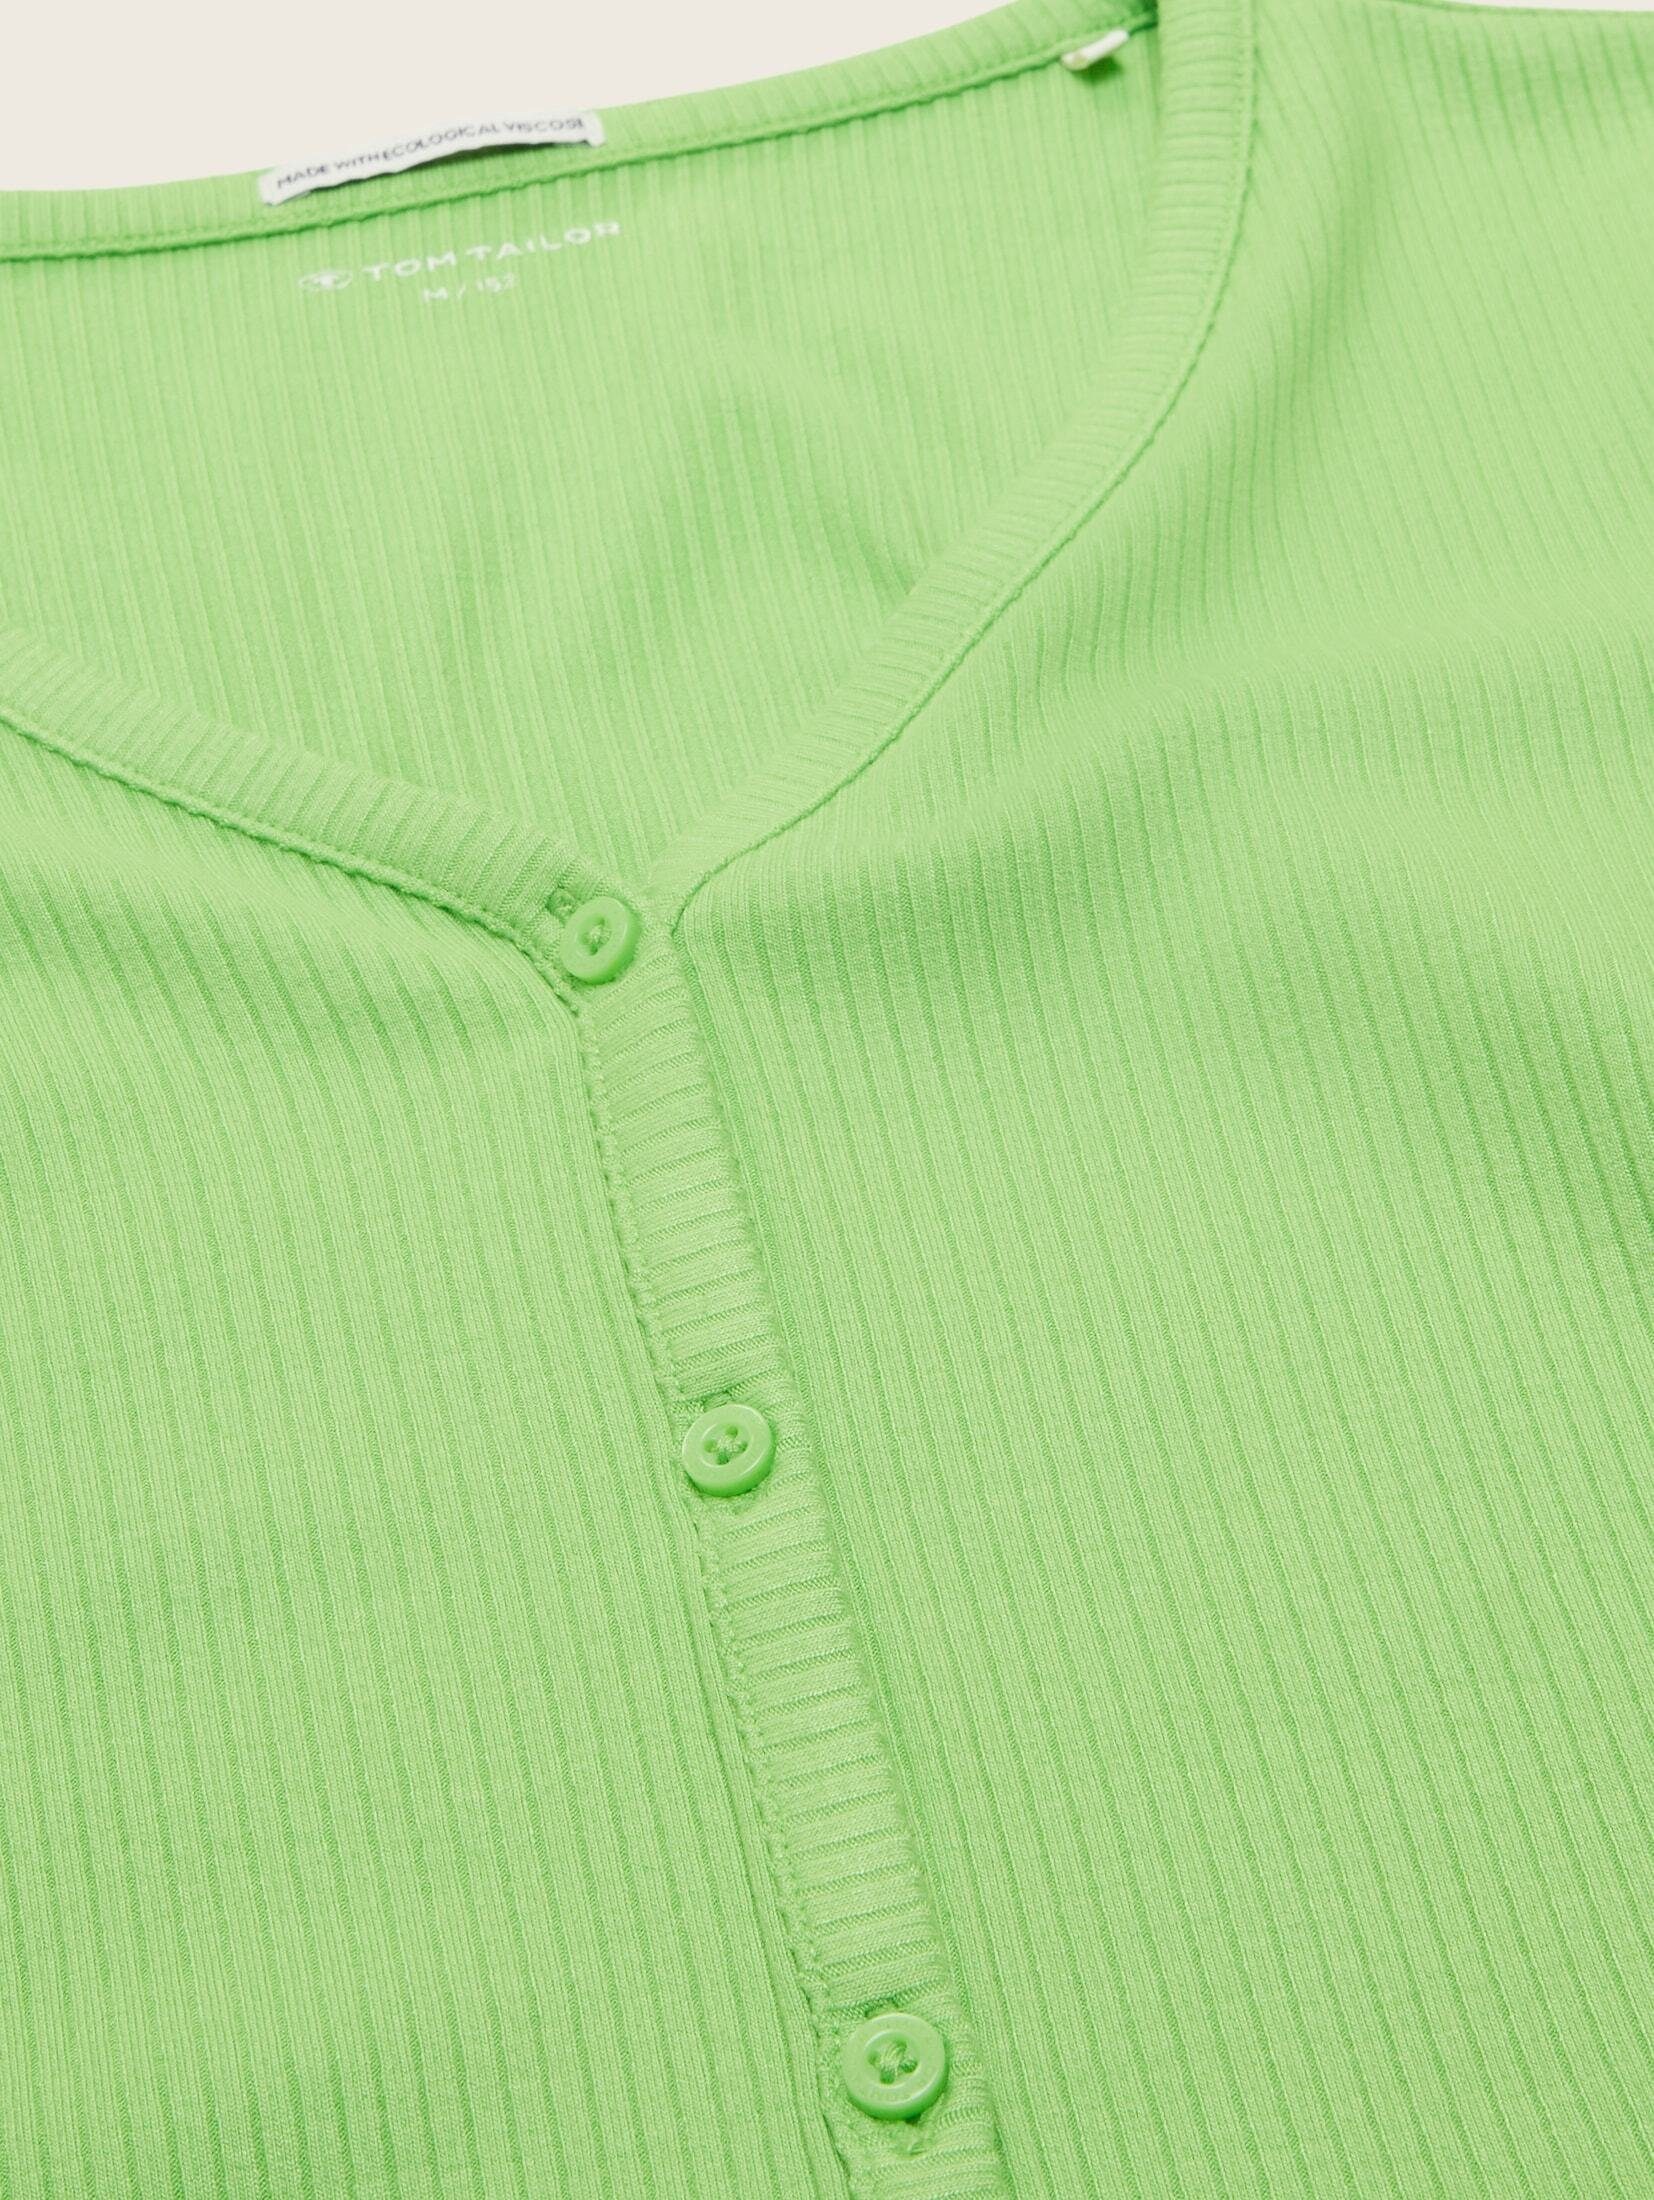 TOM TAILOR green Rippjacke lime Cropped liquid T-Shirt